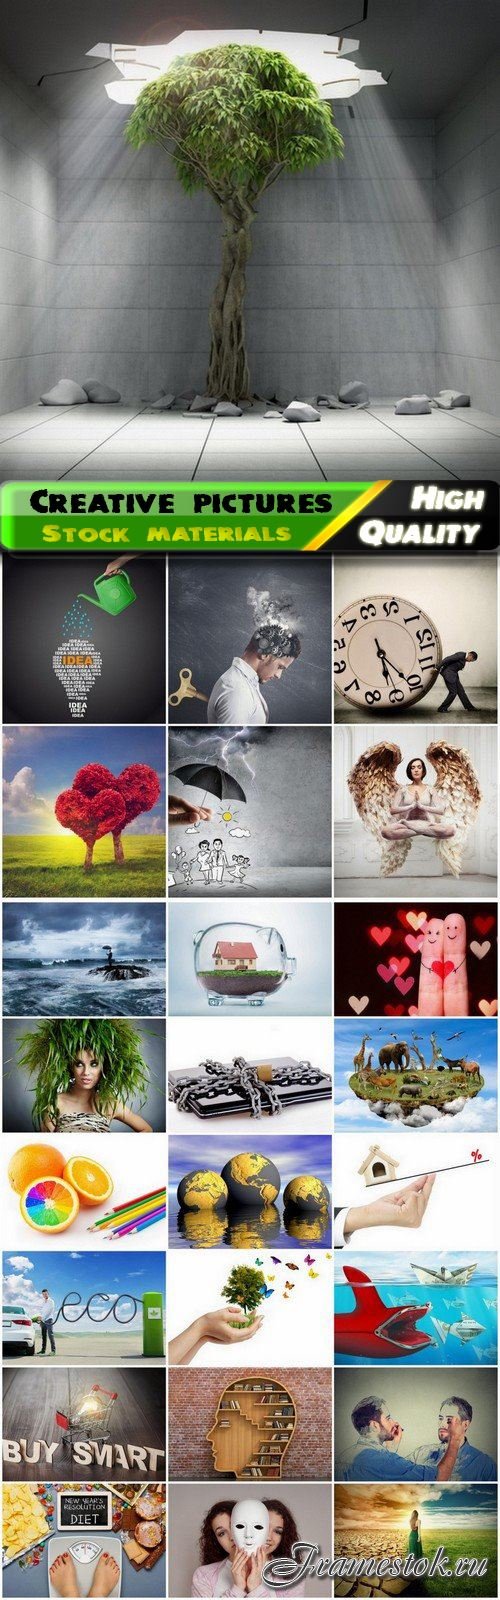 Creative conceptual layered pictures - 25 HQ Jpg